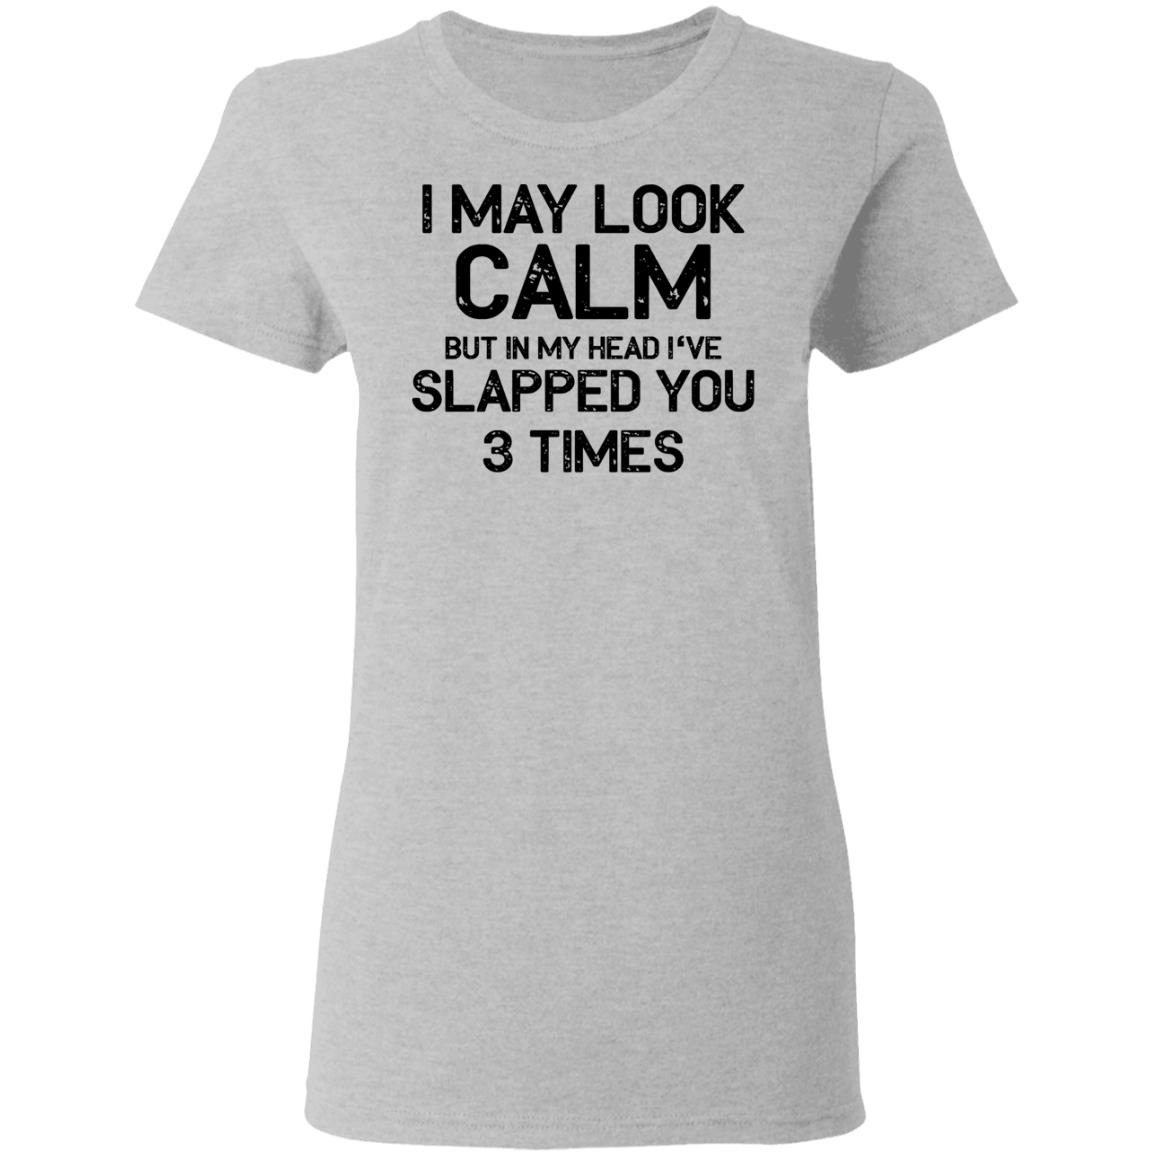 I may look calm but in my head i've slapped you 3 times shirt - Rockatee